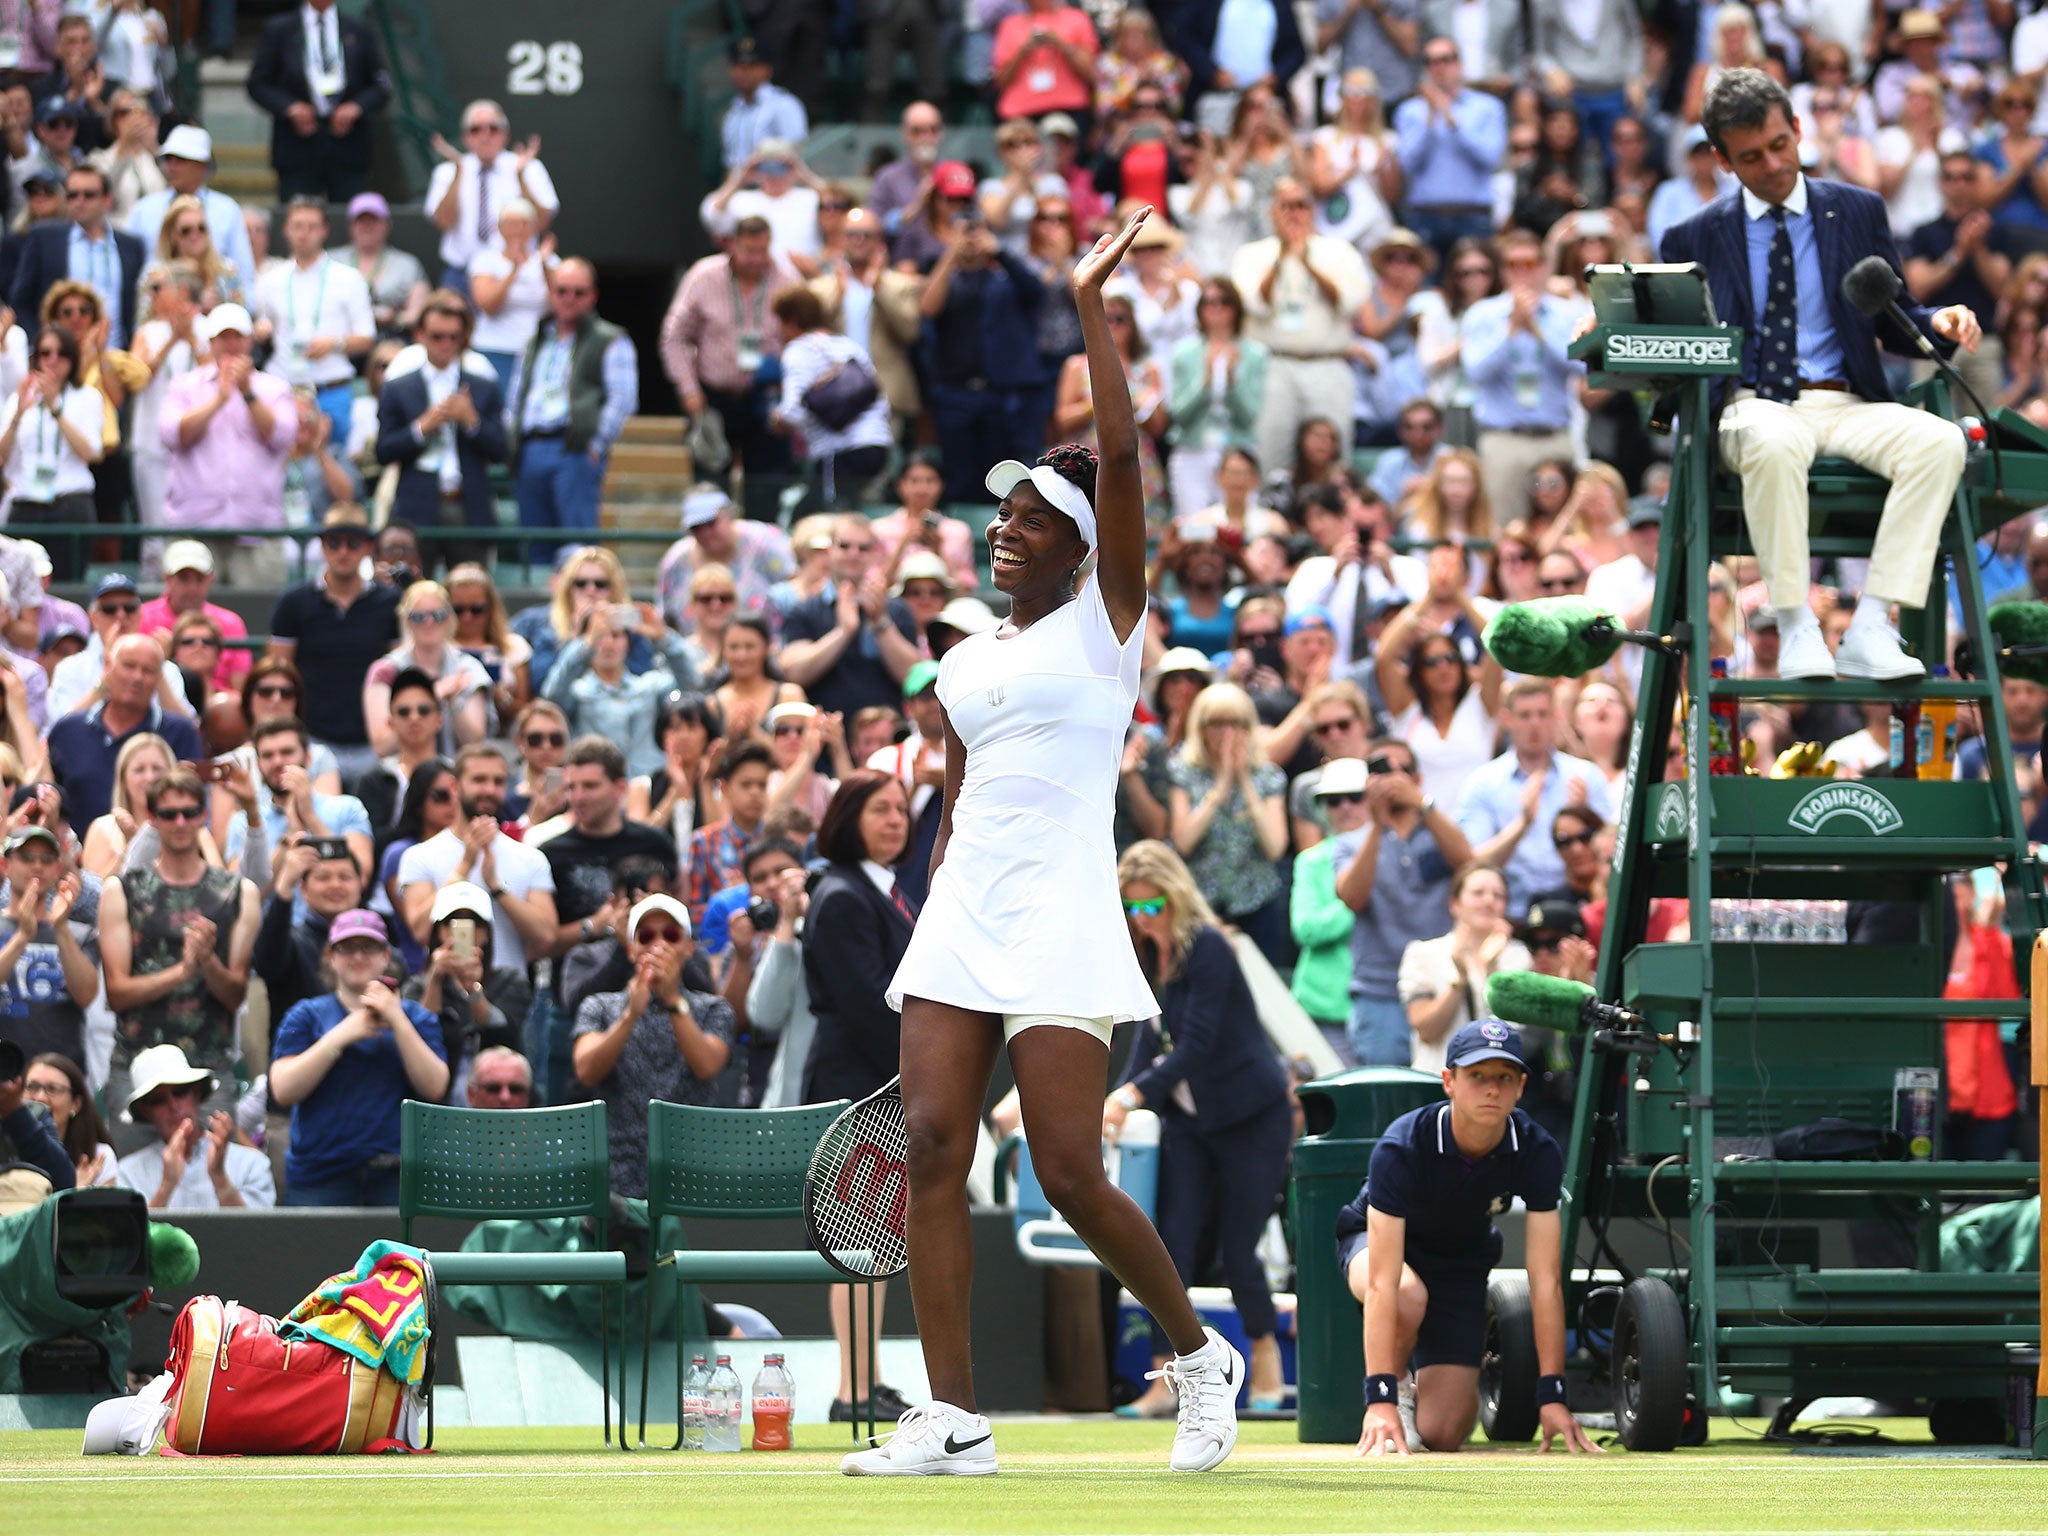 Venus Williams enjoys the moment of victory in her quarter-final